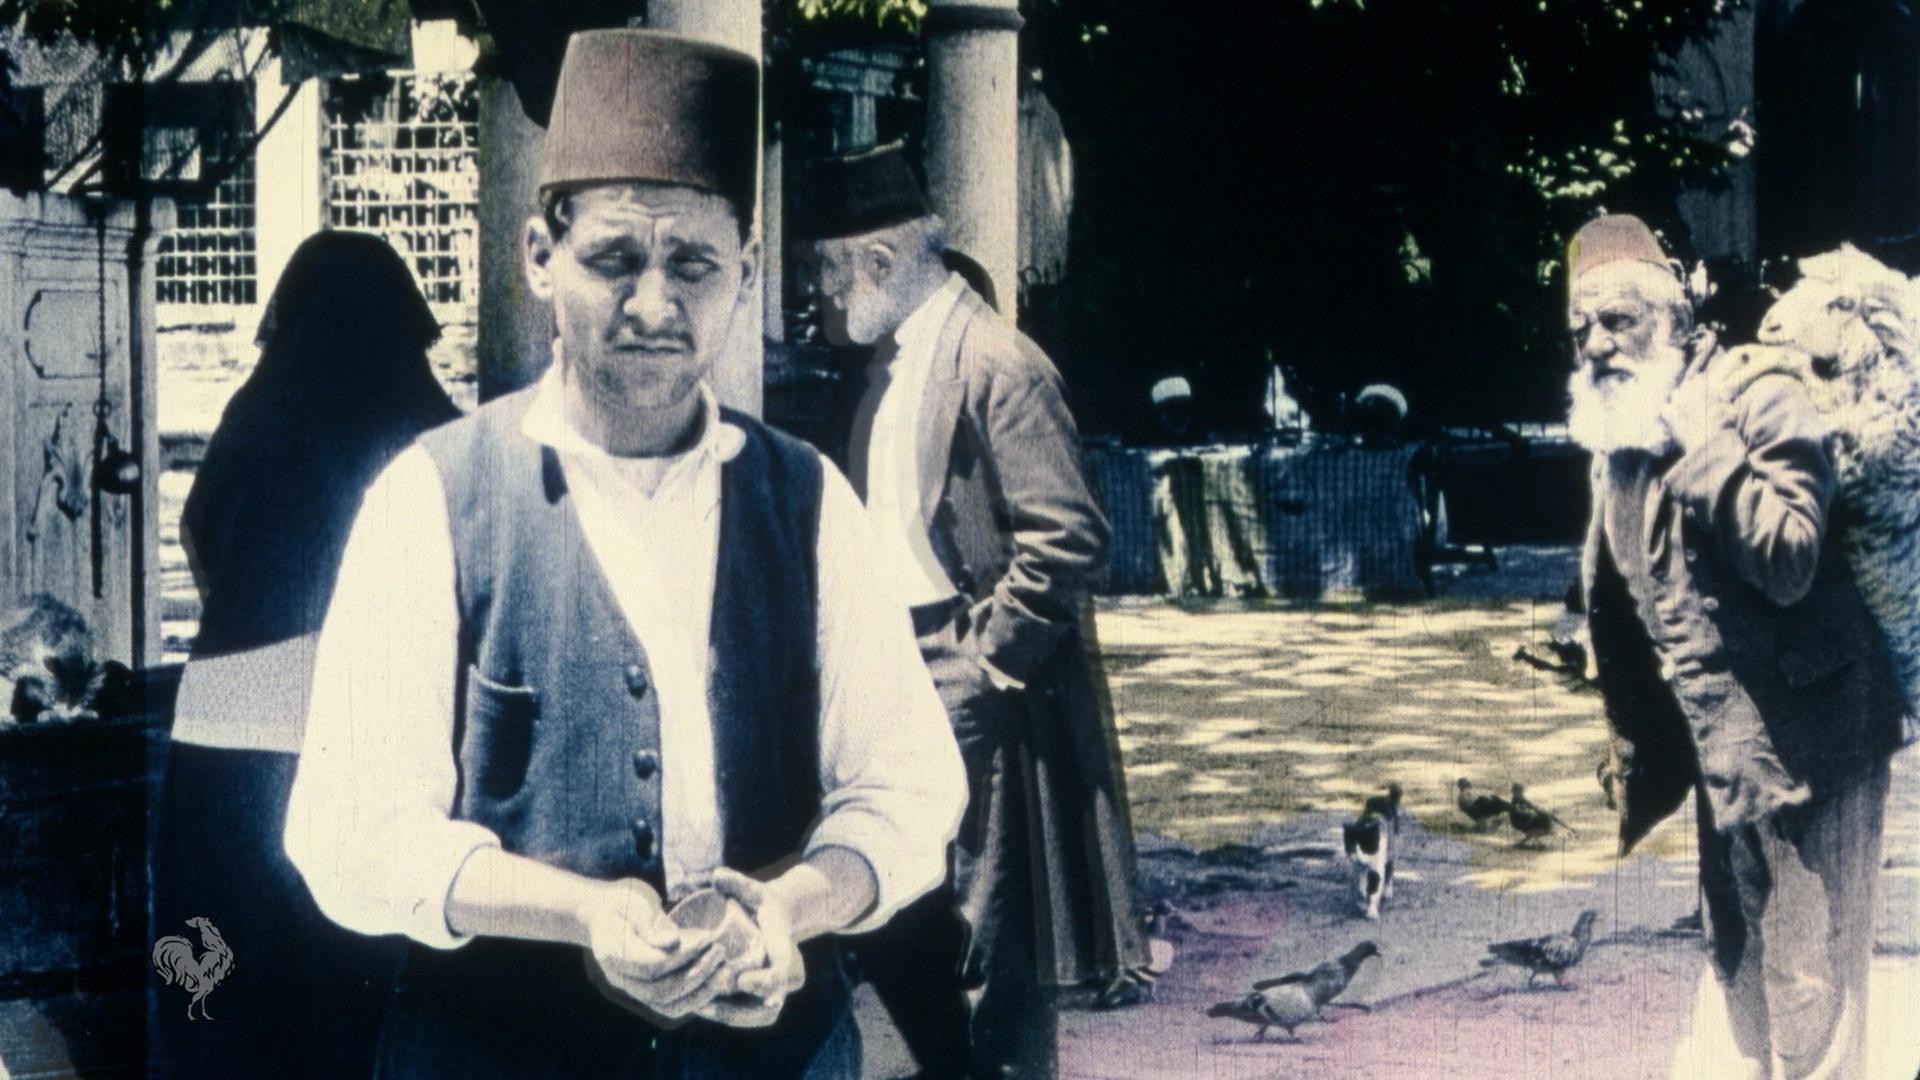 Footage still of street scene, Constantinople, early 1900s.